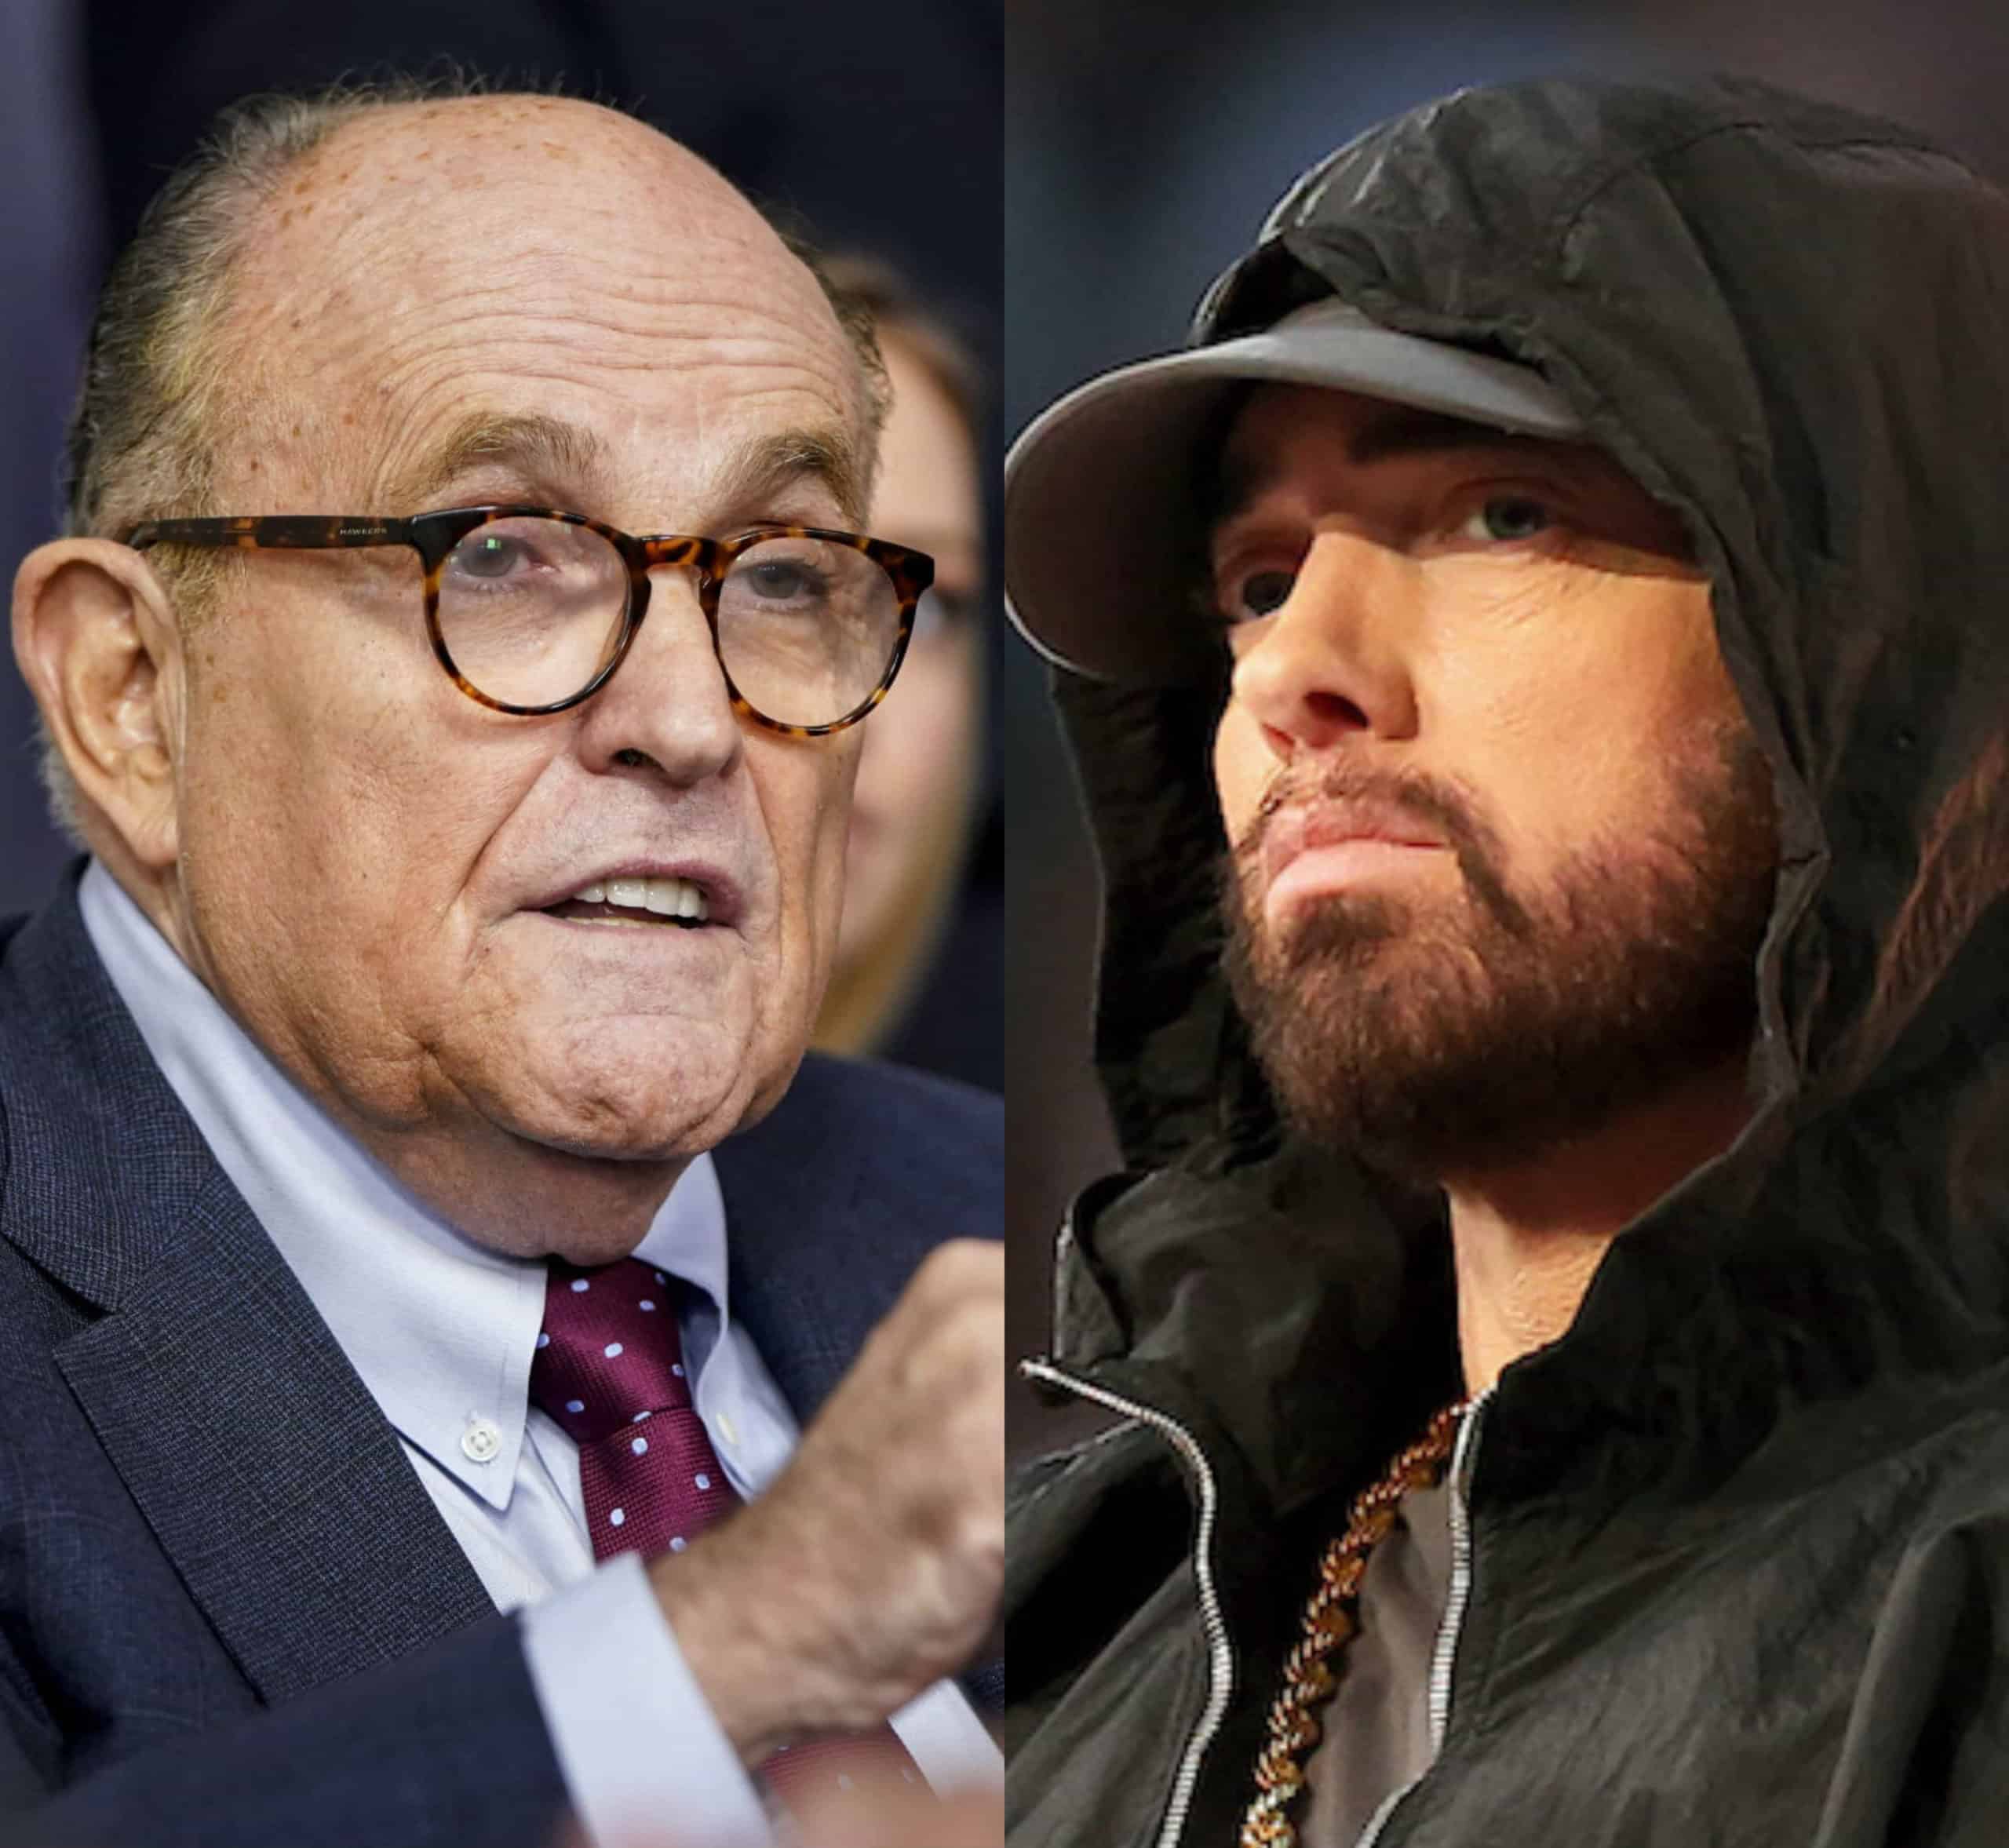 Former NYC Mayor Tells Eminem To Leave The Country For Taking A Knee At Super Bowl